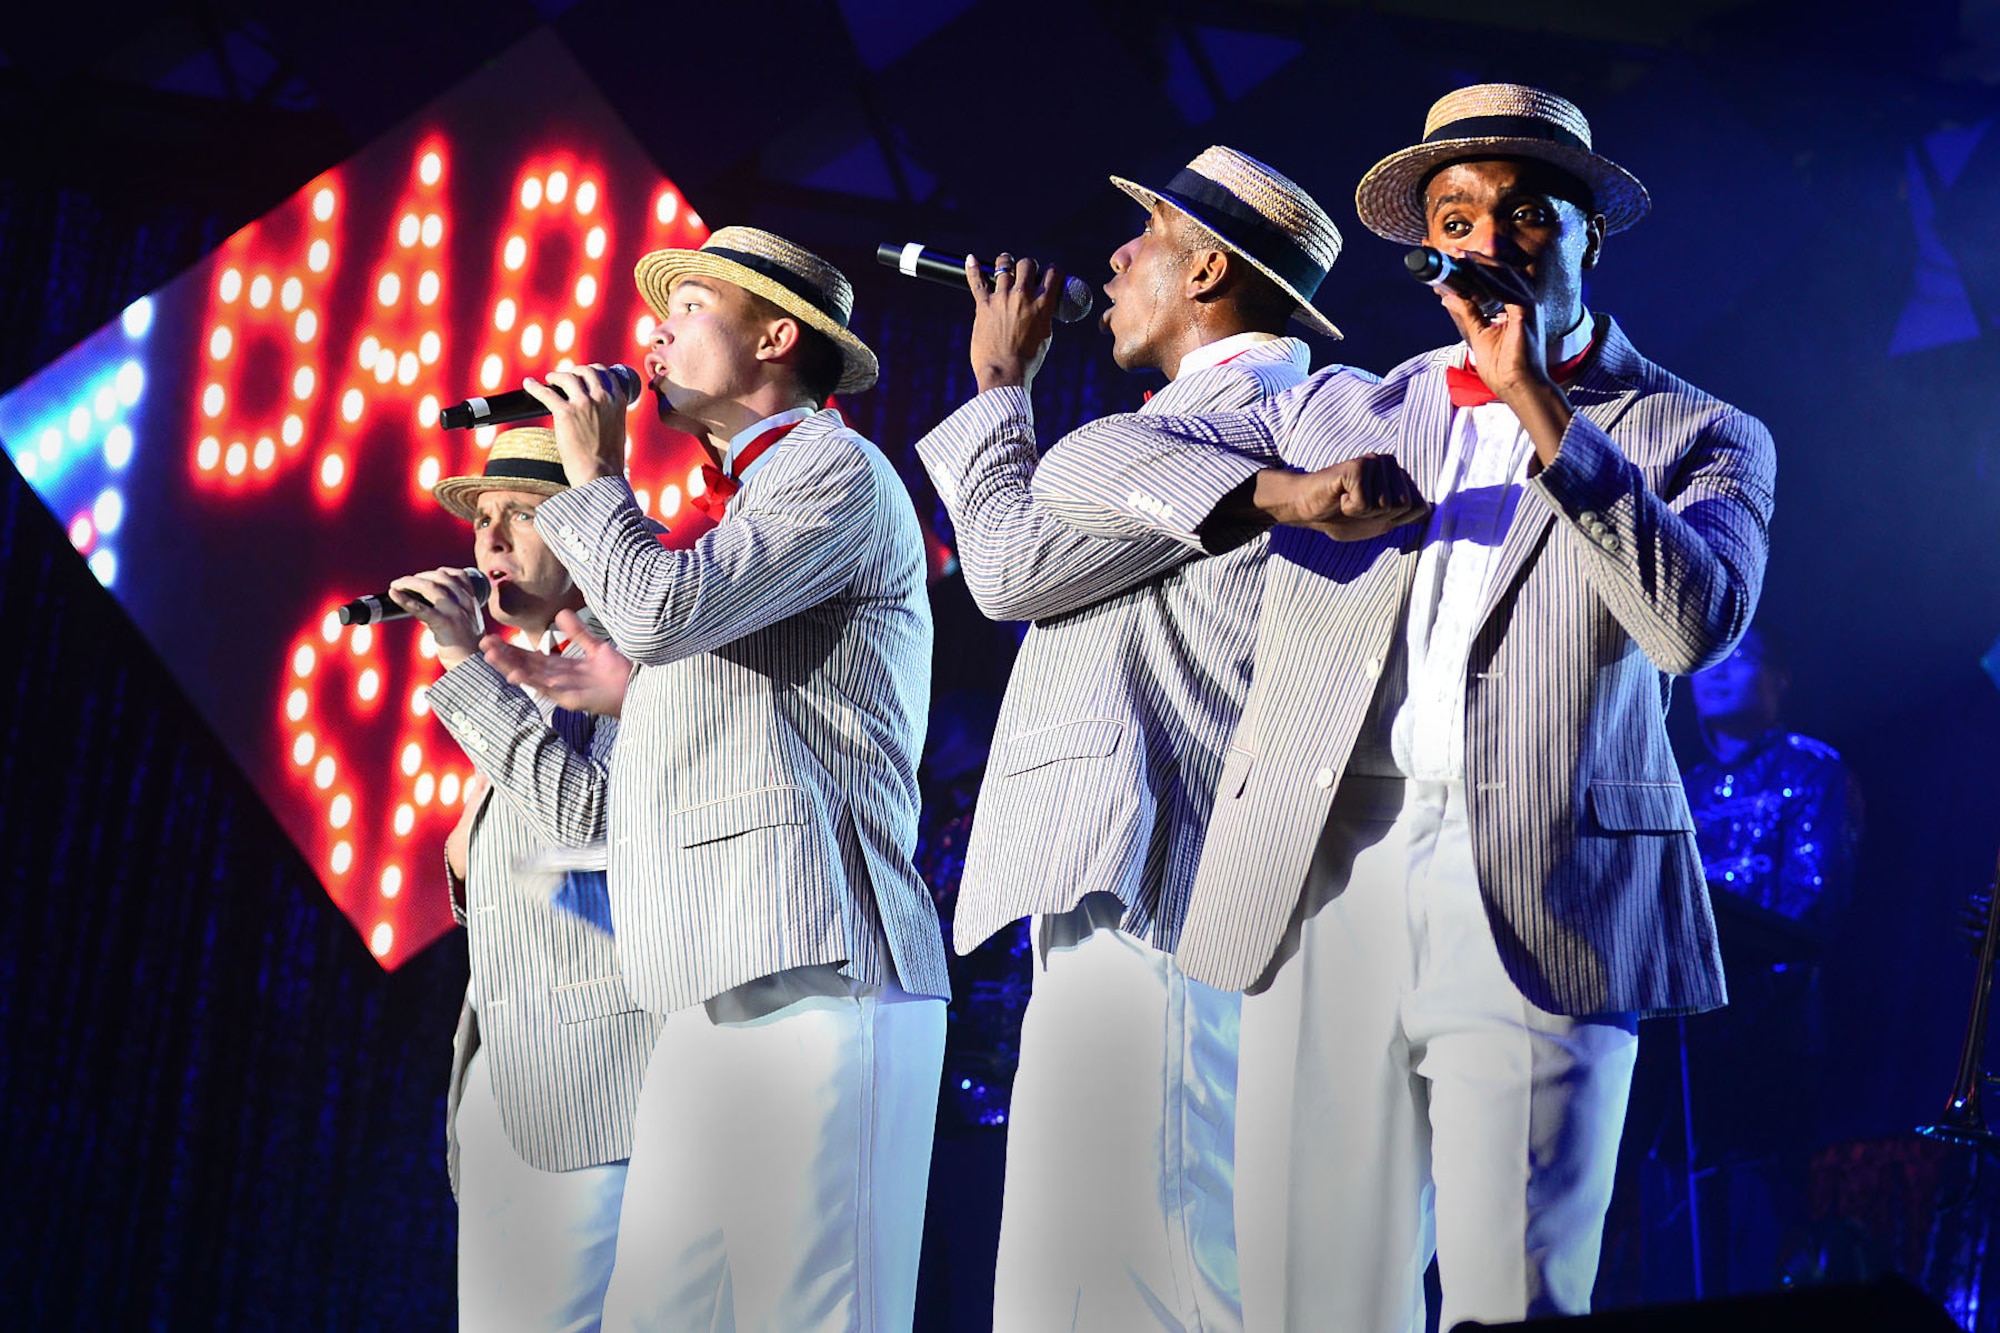 Members of Tops in Blue perform a show at the Hampton Roads Convention Center in Hampton, Va., Oct. 6, 2015. The performance group is one of the oldest and most widely traveled entertainment groups of its kind. (U.S. Air Force photo/Senior Airman Kimberly Nagle)